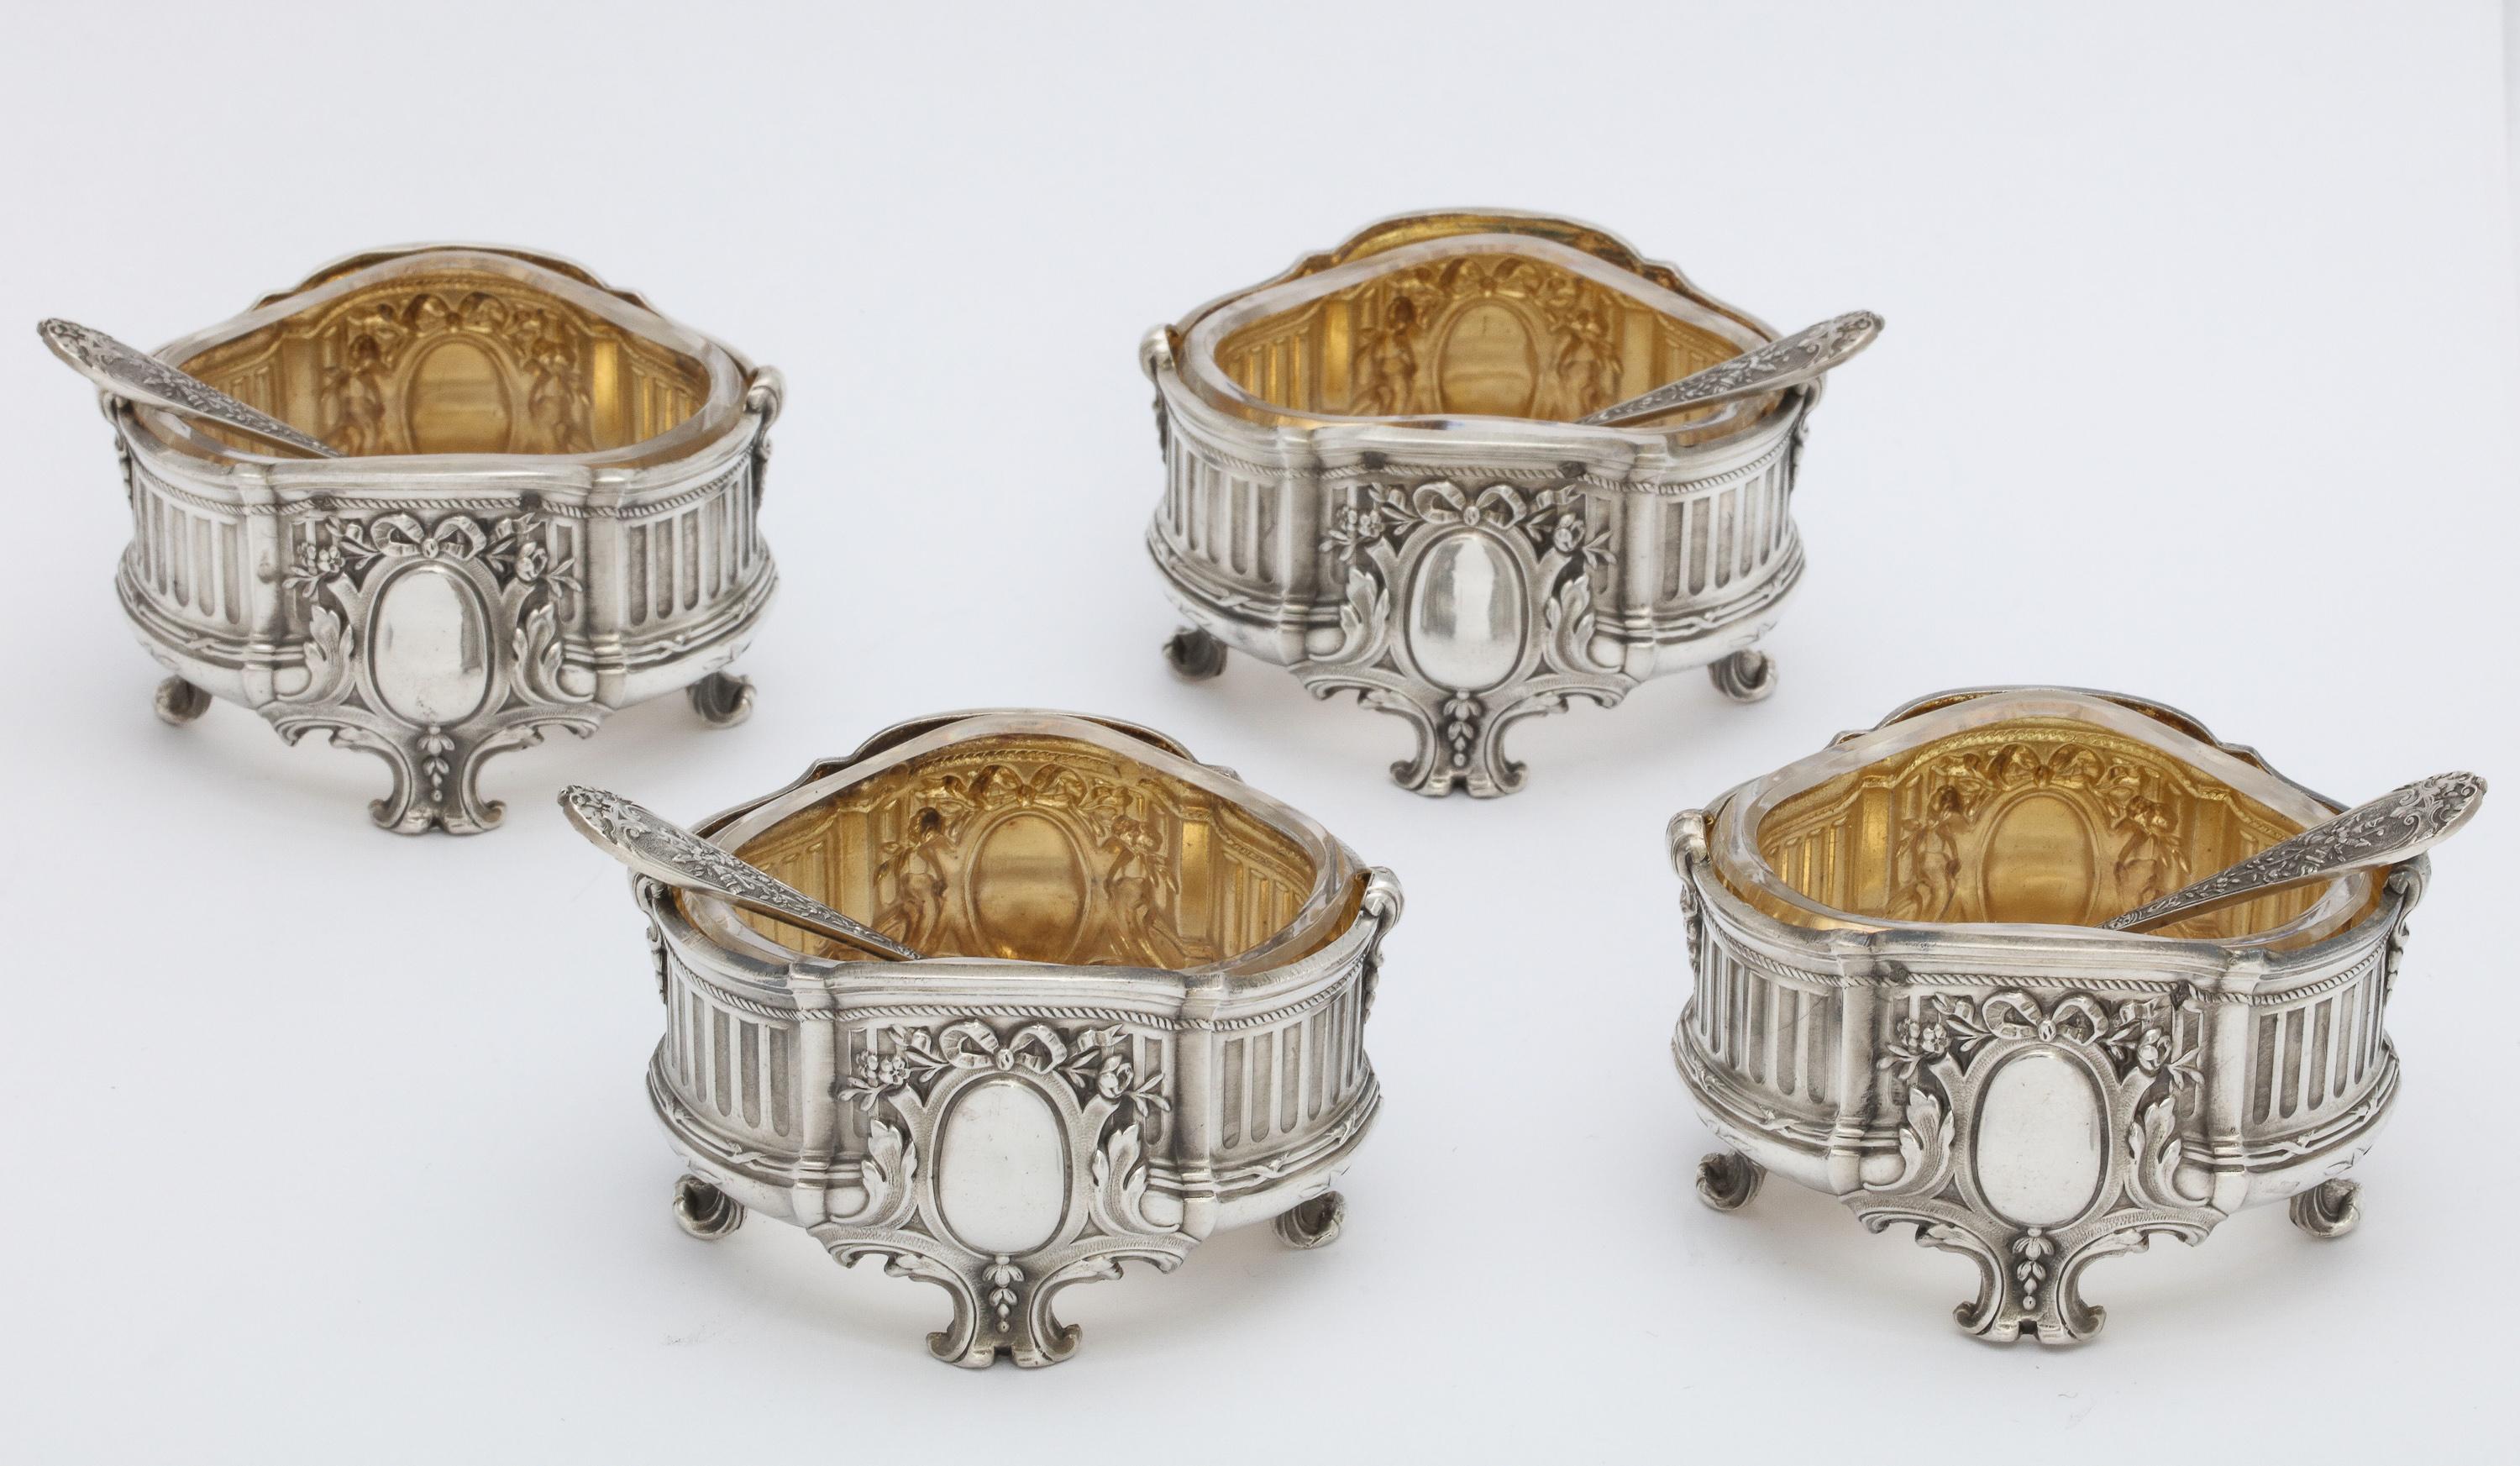 Set of four Empire, sterling silver (.950), footed open salt cellars with matching spoons and liners, Paris, circa 1900, Isabelle Venner, maker. Each salt cellar is gilded on the insider (as are the bowls of each of the matching salt spoons) and has